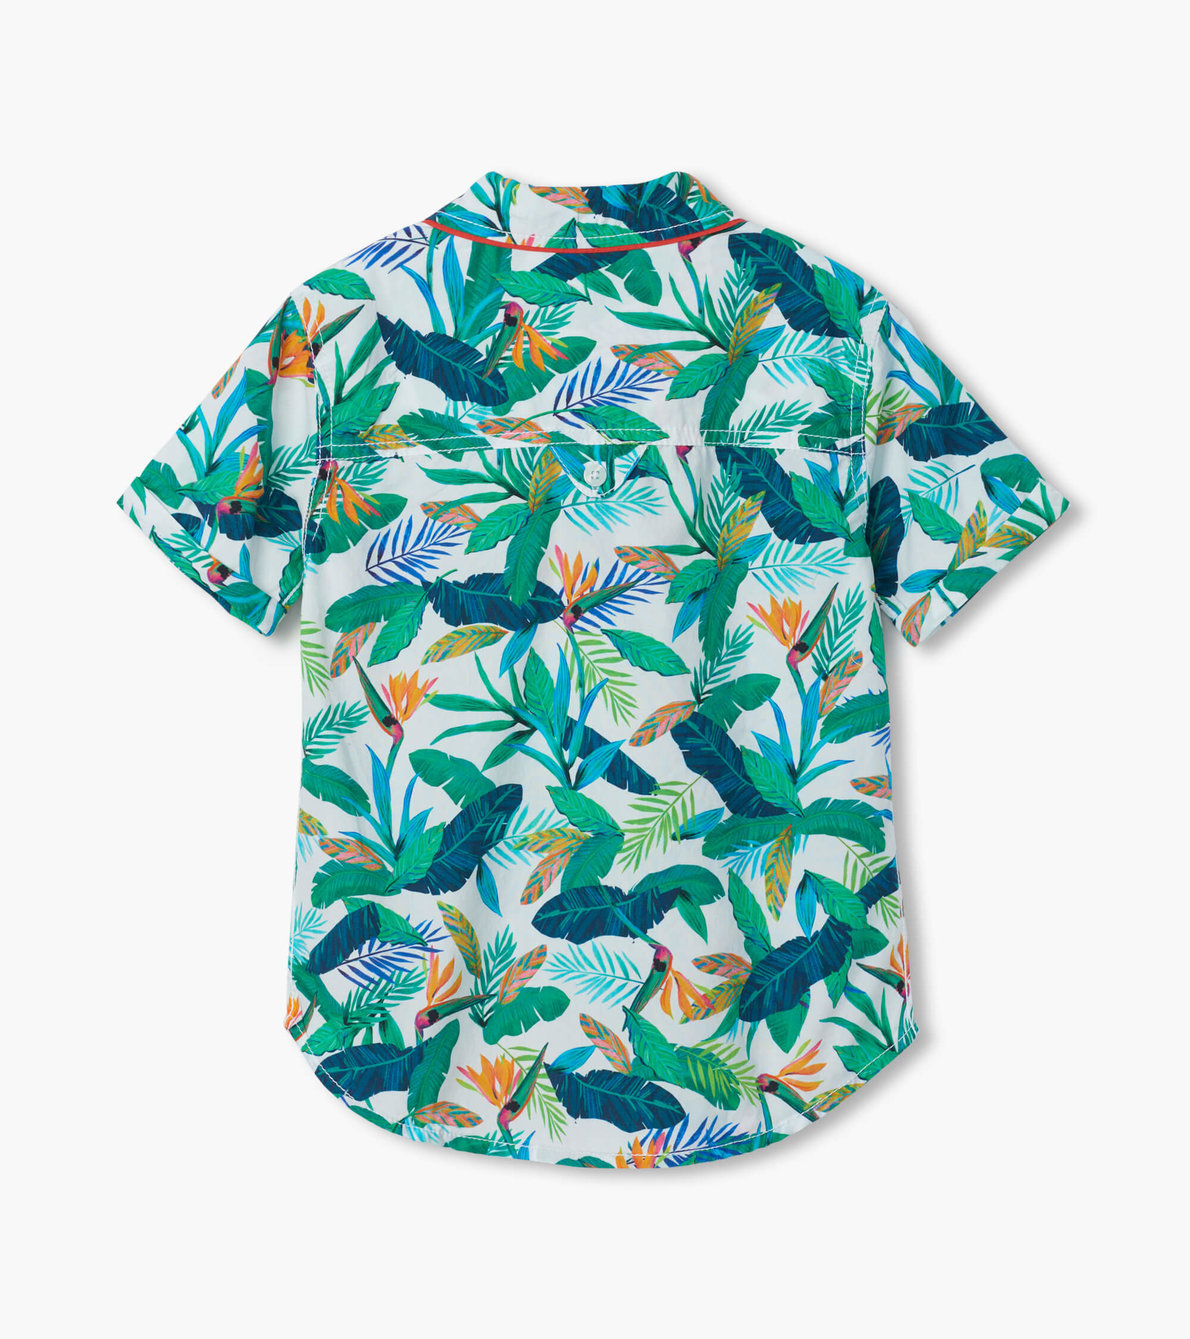 View larger image of Tropical Paradise Short Sleeve Button Down Shirt